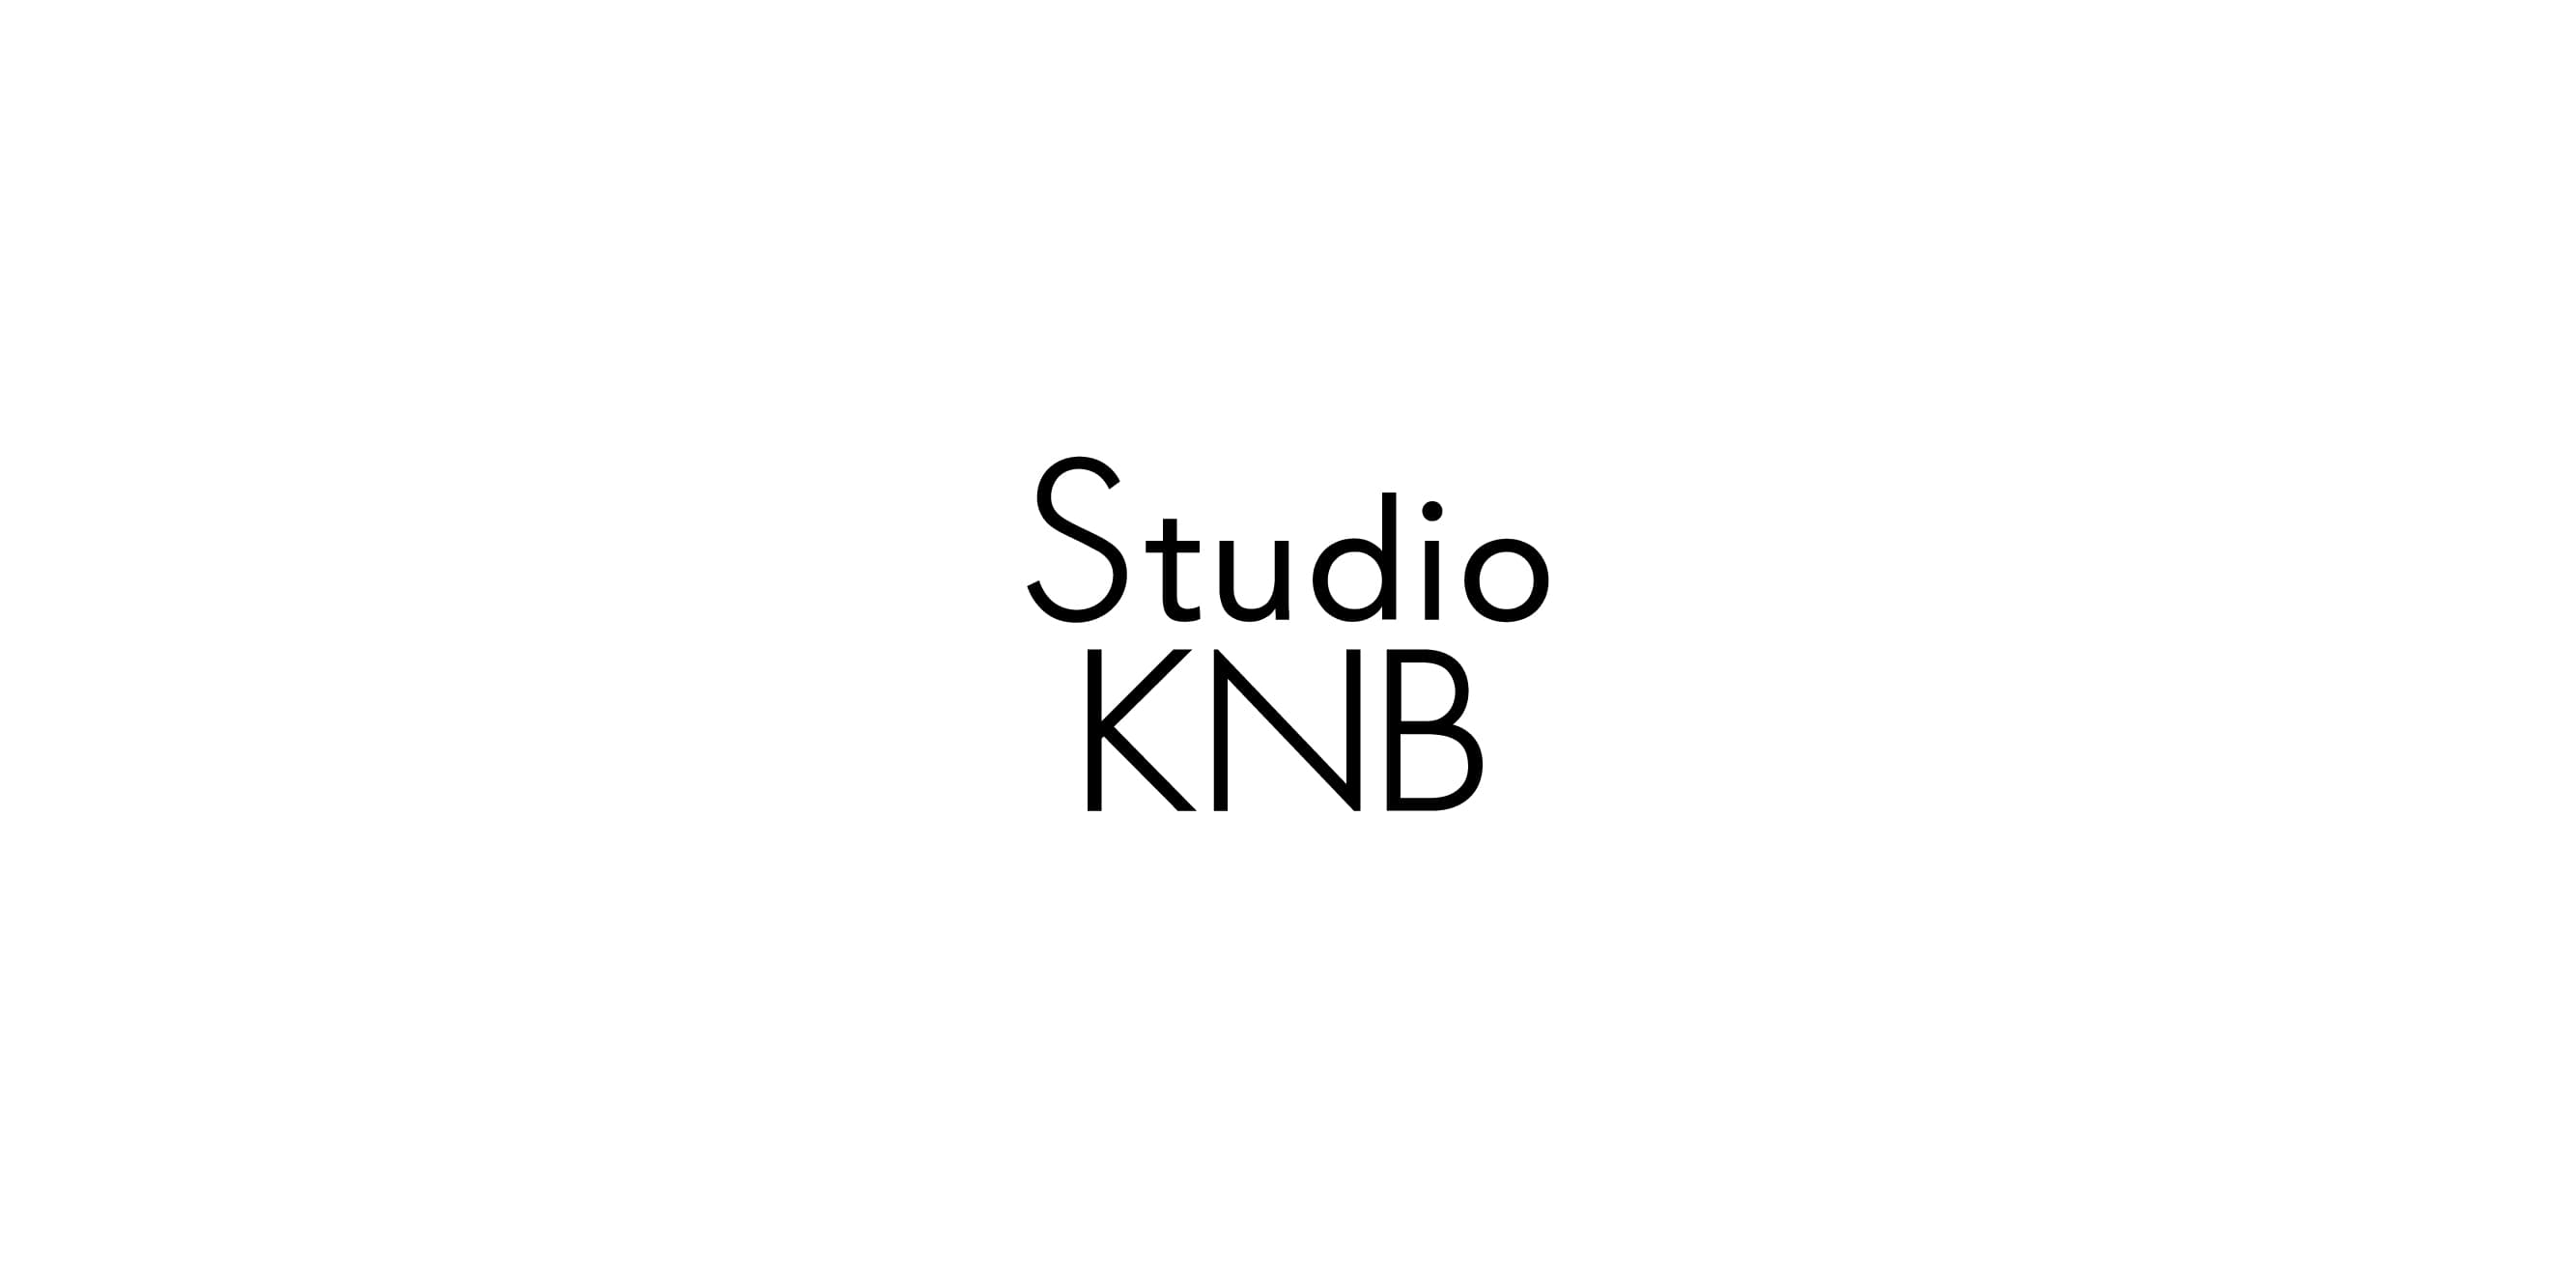 KNB: ABOUT THE STUDIO